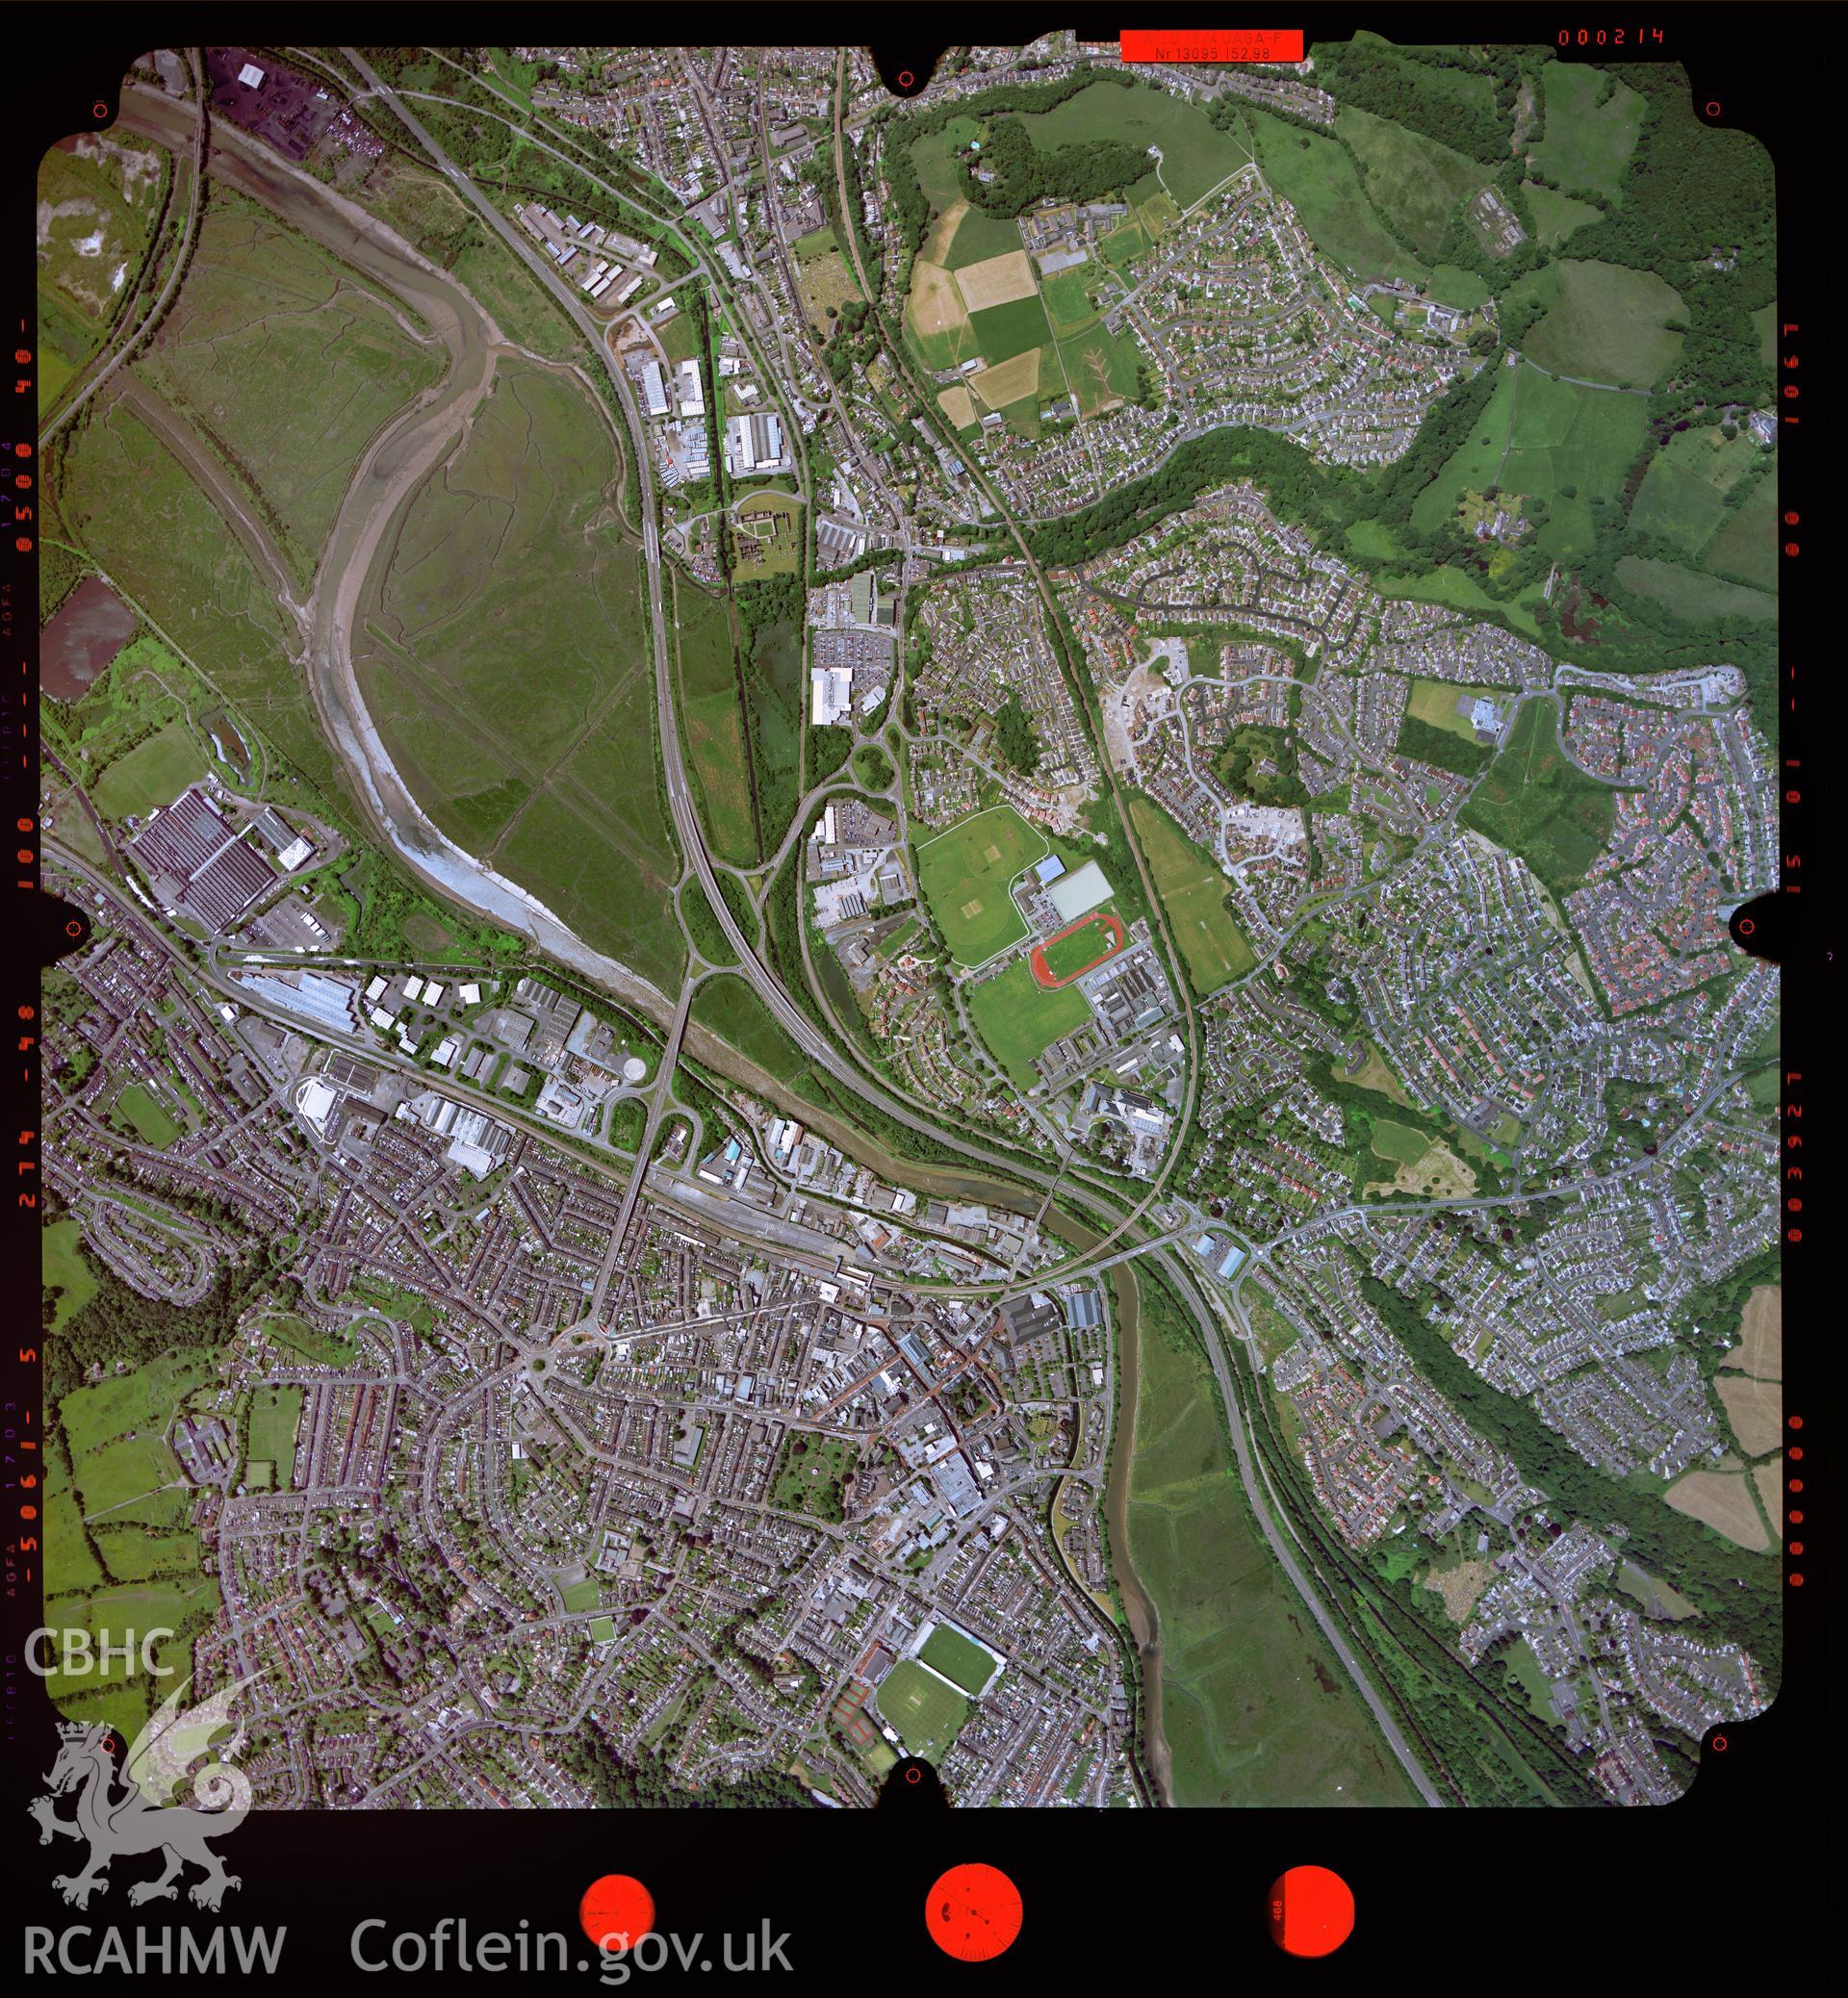 Digitized copy of a colour aerial photograph showing the Neath area, taken by Ordnance Survey, 2003.